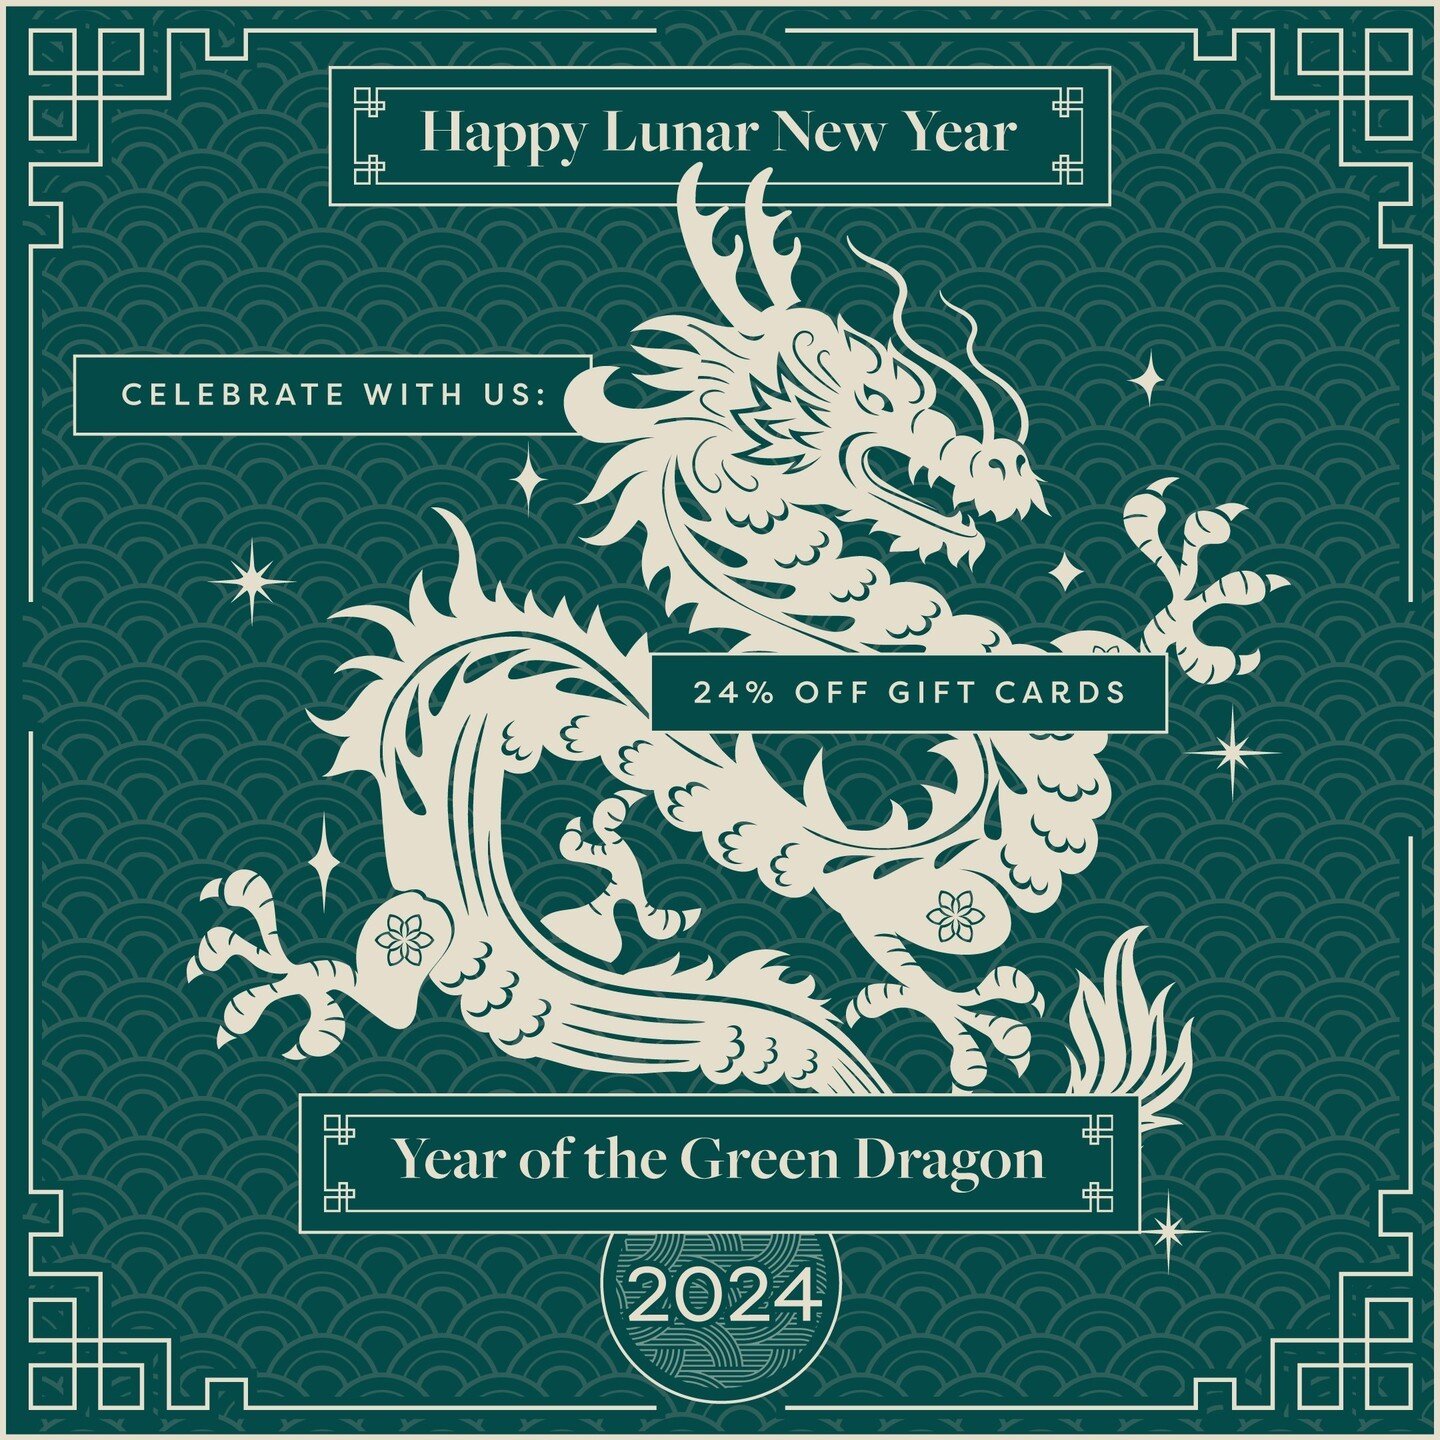 We&rsquo;re getting ready to welcome the Year of the Green Dragon! 🐲⁠
⁠
We are celebrating by giving 🀄️🟢 24% OFF GIFT CARDS 🟢🀄️ at the link in bio for a limited time⁠
⁠
Use code DRAGON2024.⁠
⁠
Here is the symbolism of the coming 🐉 year:⁠
⁠
The 